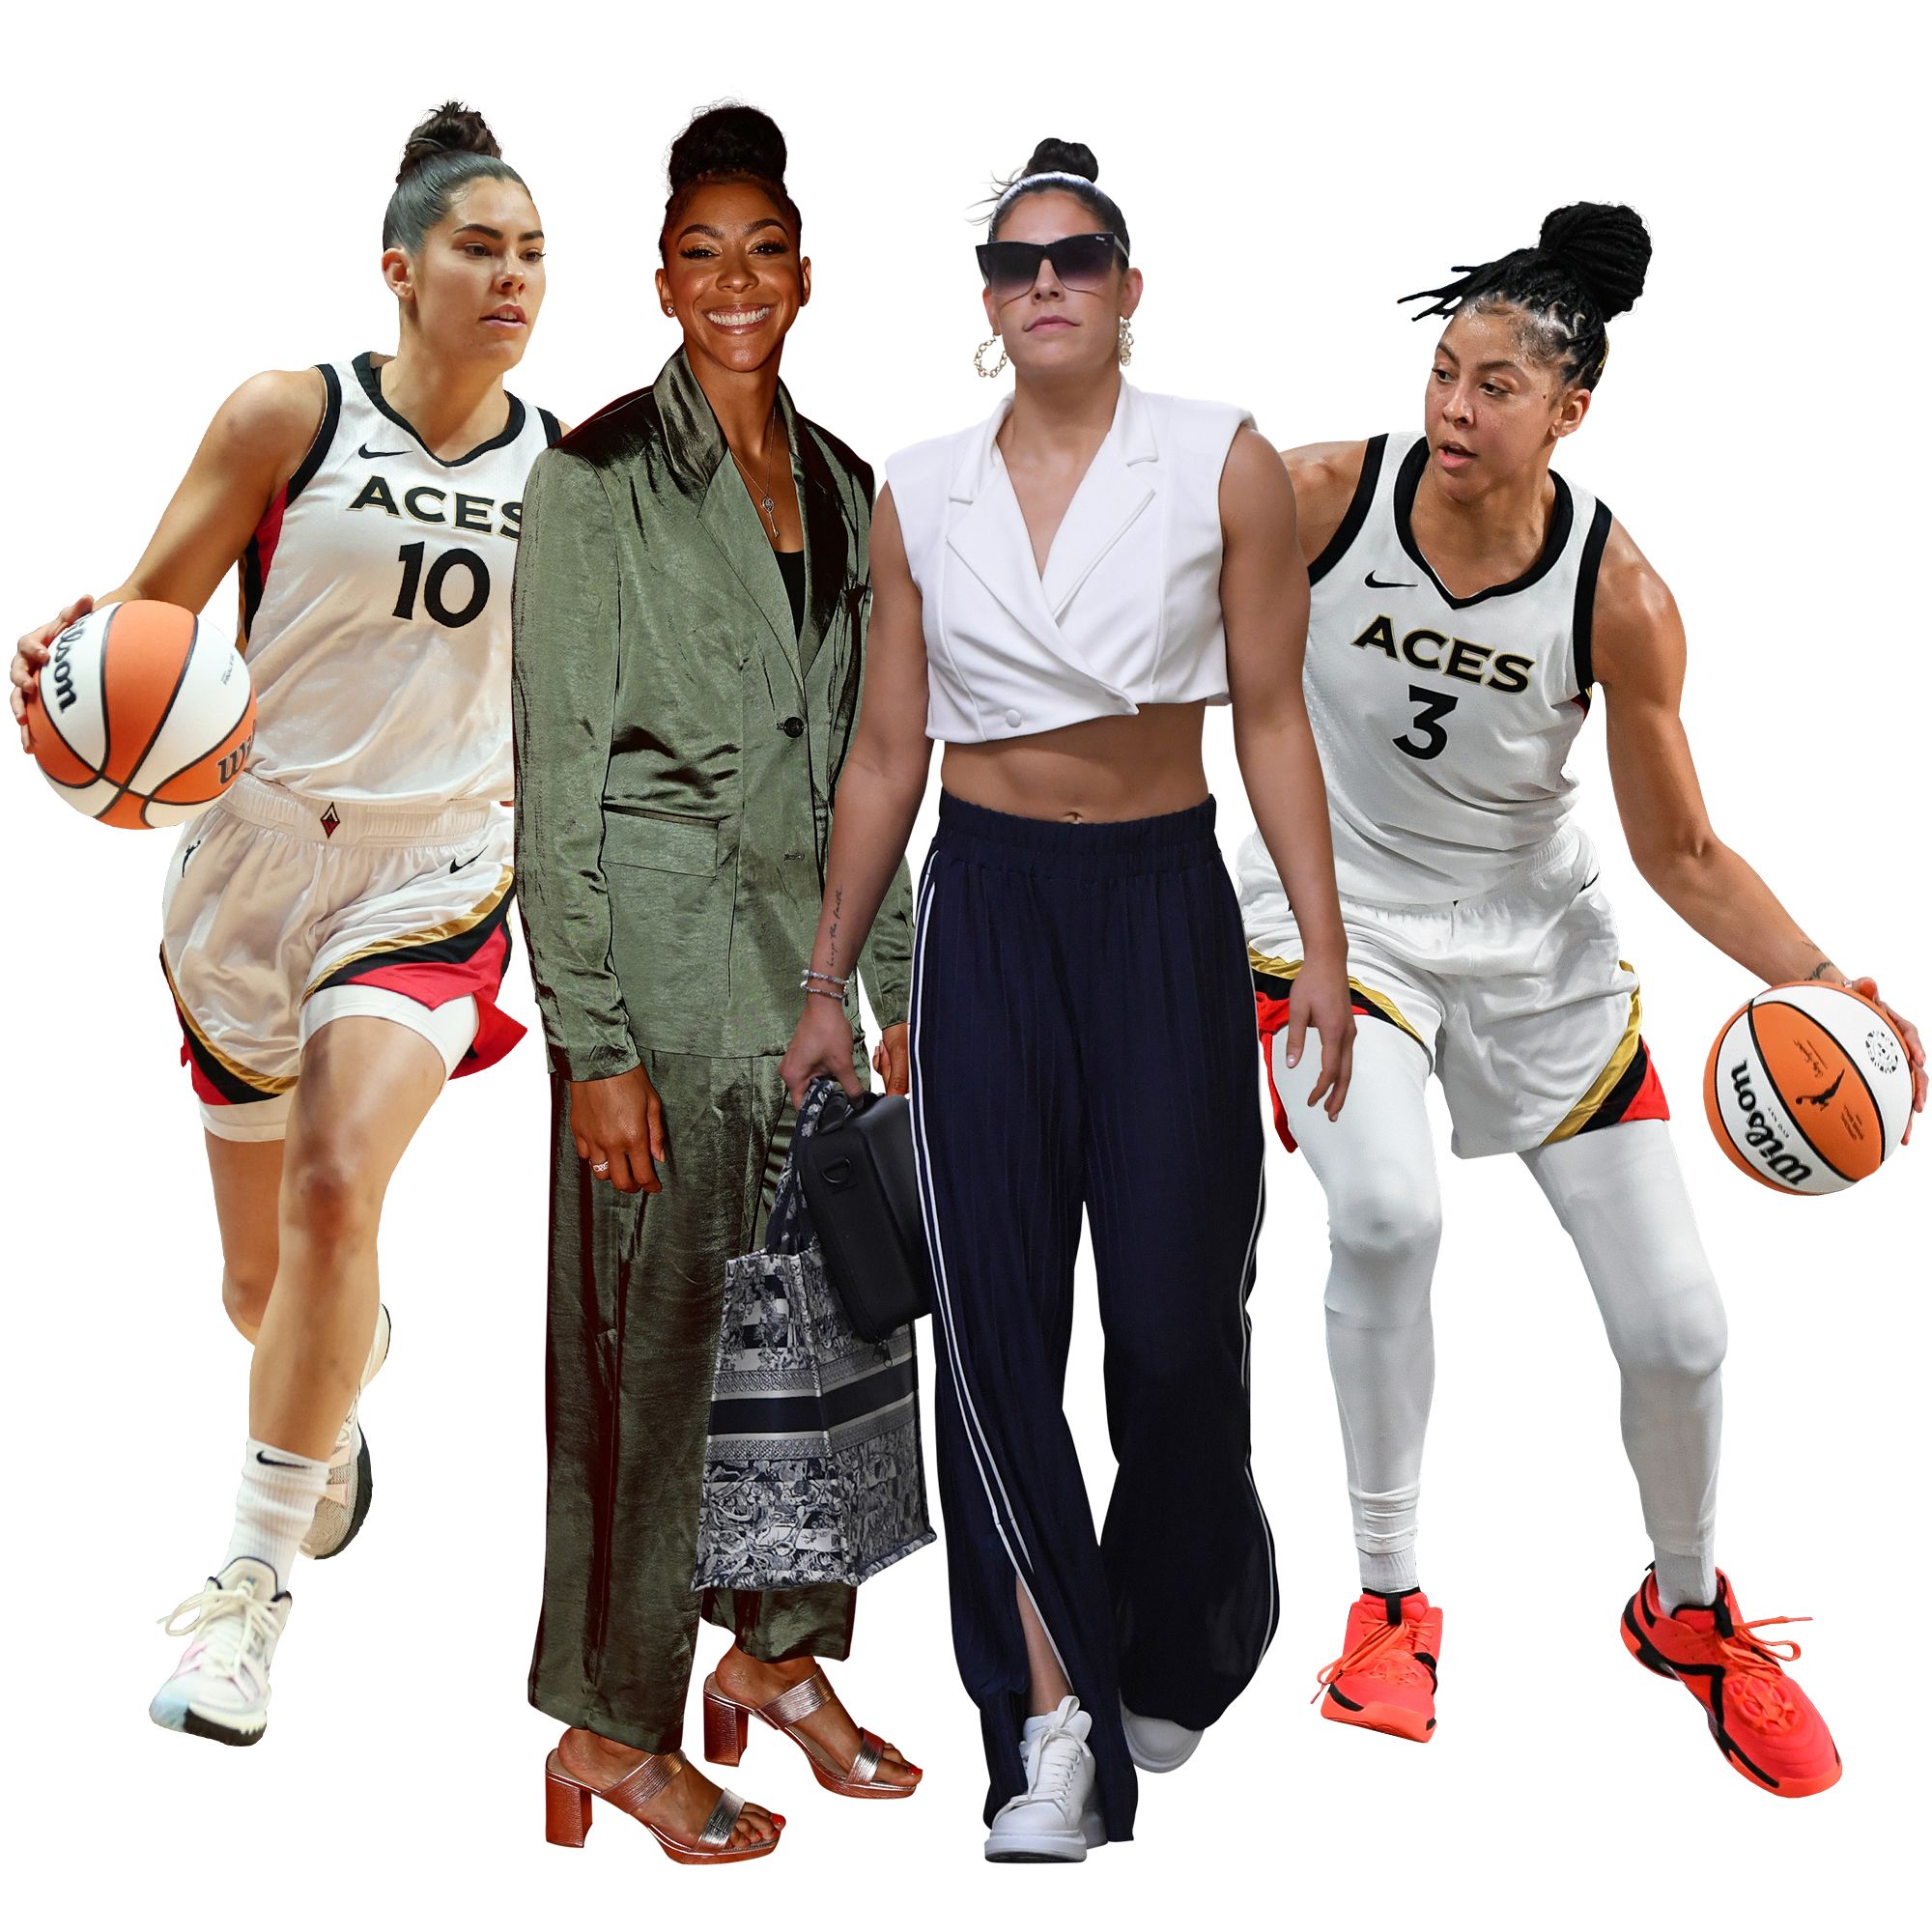 Sometimes, Candace Parker has a hard time believing it's real. The WNBA star has spent 16 seasons in the league, where she's been named to seven All-Star teams and has won two championships. Parker has played professionally in Russia, China, and Turkey, and she's won two gold medals with the U.S. Olympic team, as well as two national championships at the University of Tennessee. At 37, the 6'4